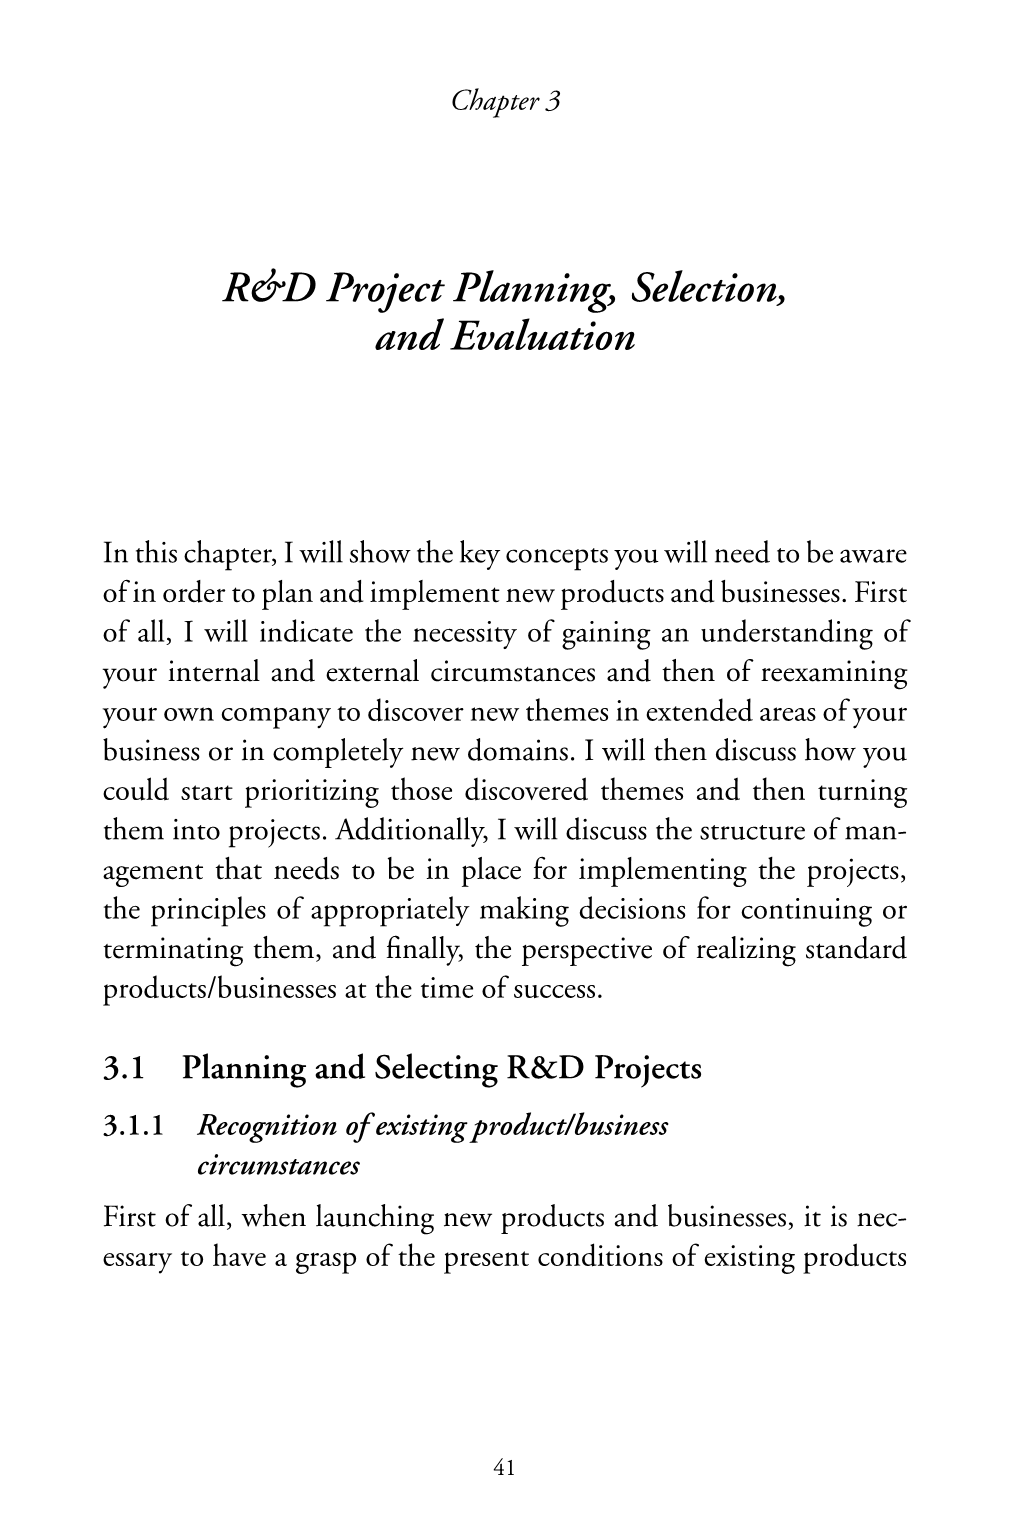 R&D Project Planning, Selection, and Evaluation